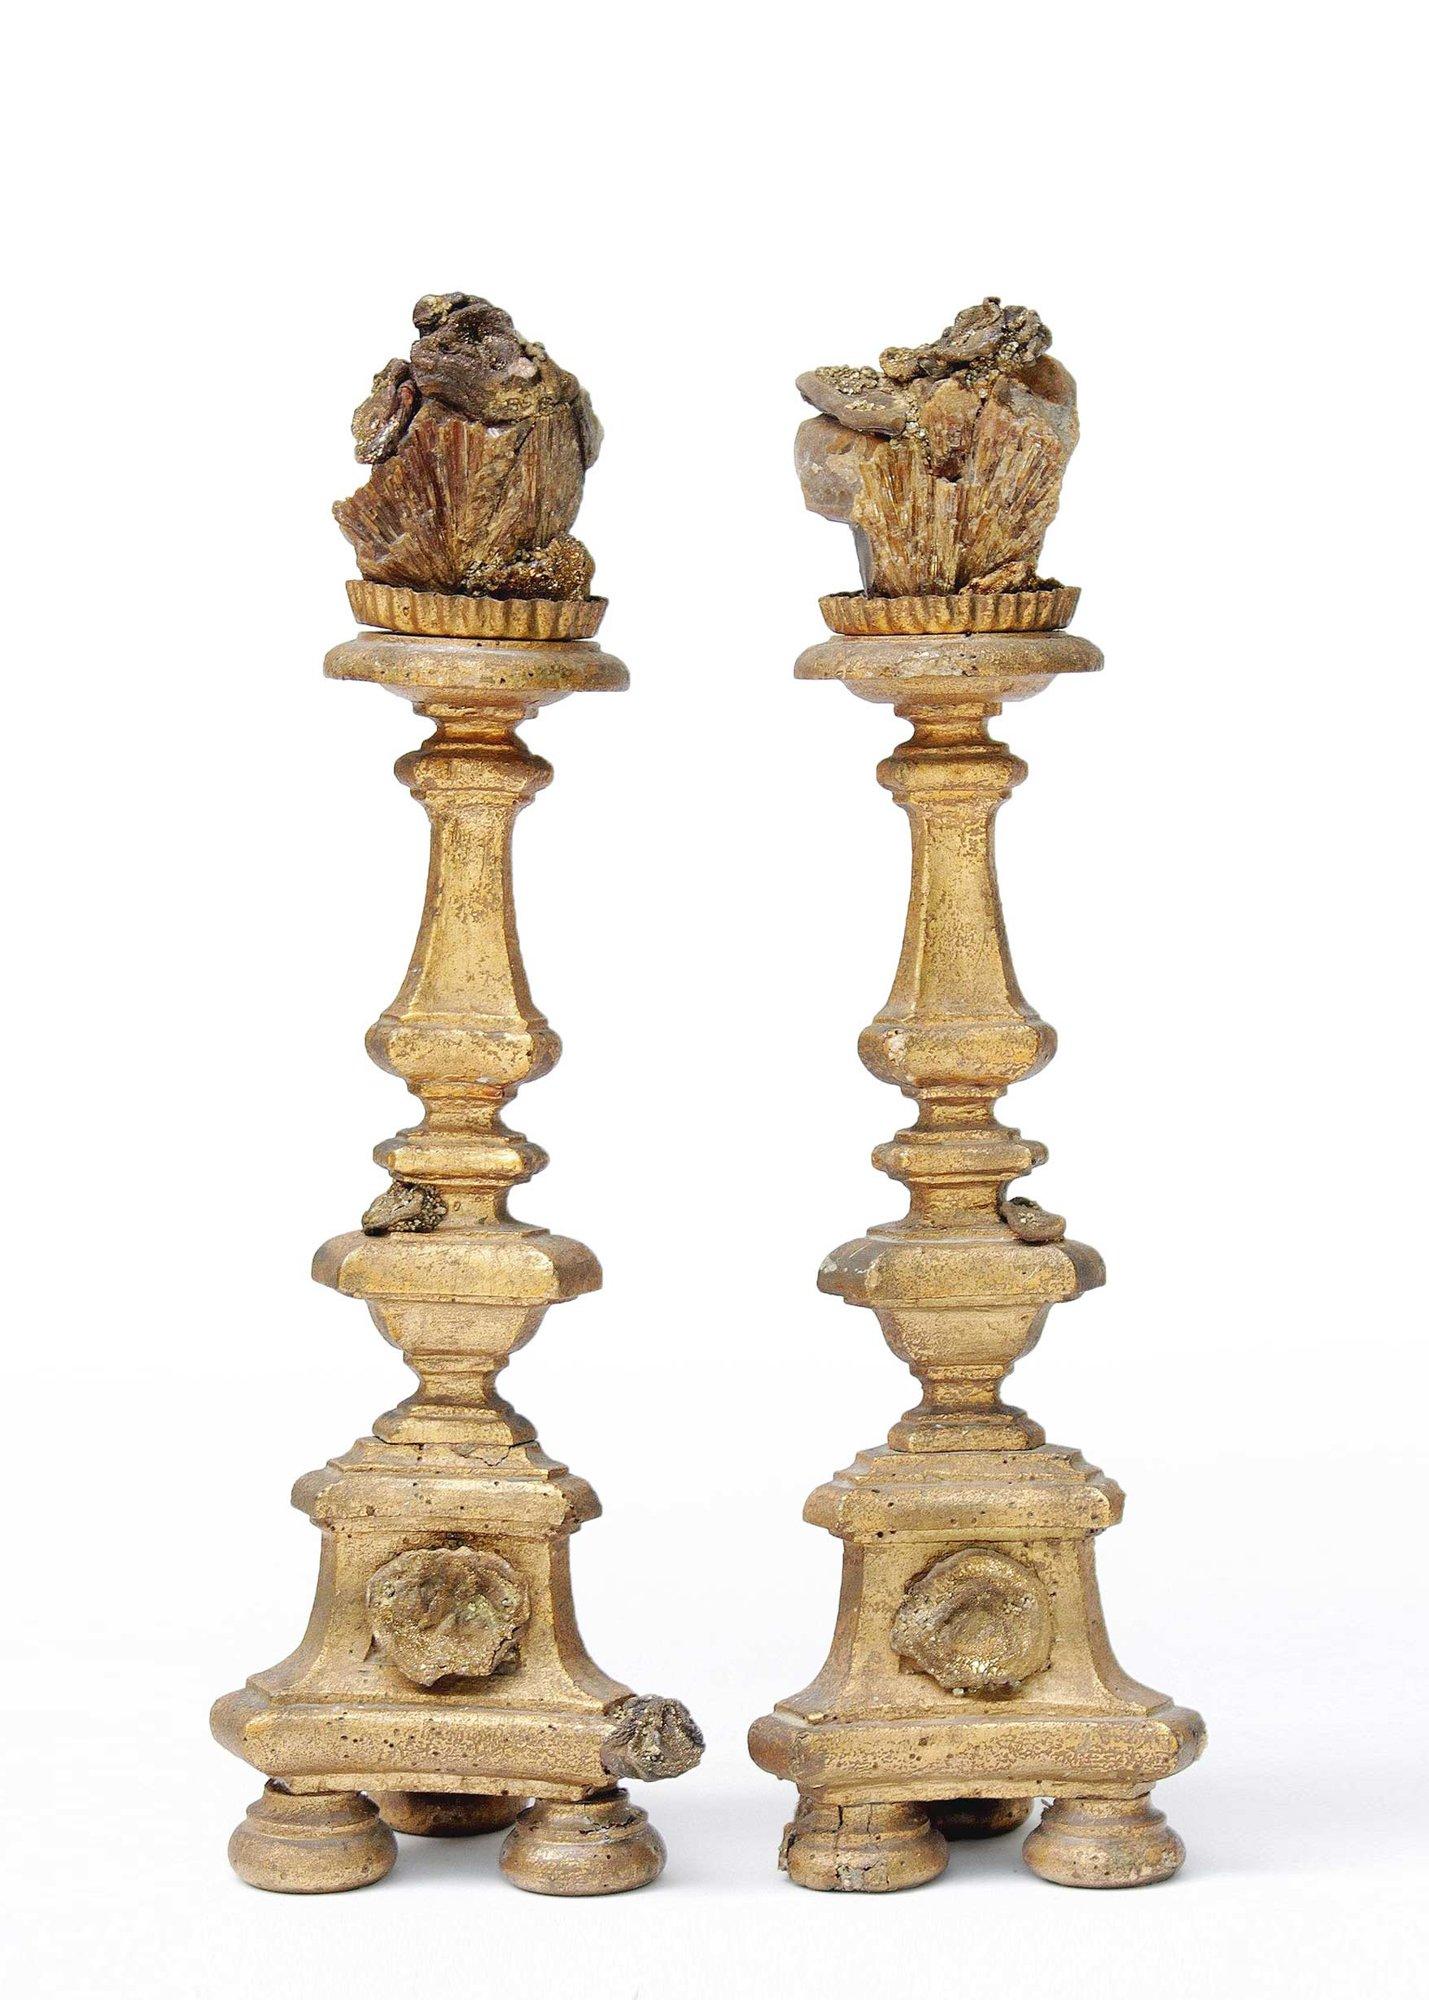 A pair of 18th century Italian candlesticks adorned with chalcedony rosettes with deposits of pyrite and golden barite crystals tapering down the matrix. Barite crystals are a very rare and valuable natural specimen. They are museum specimens and